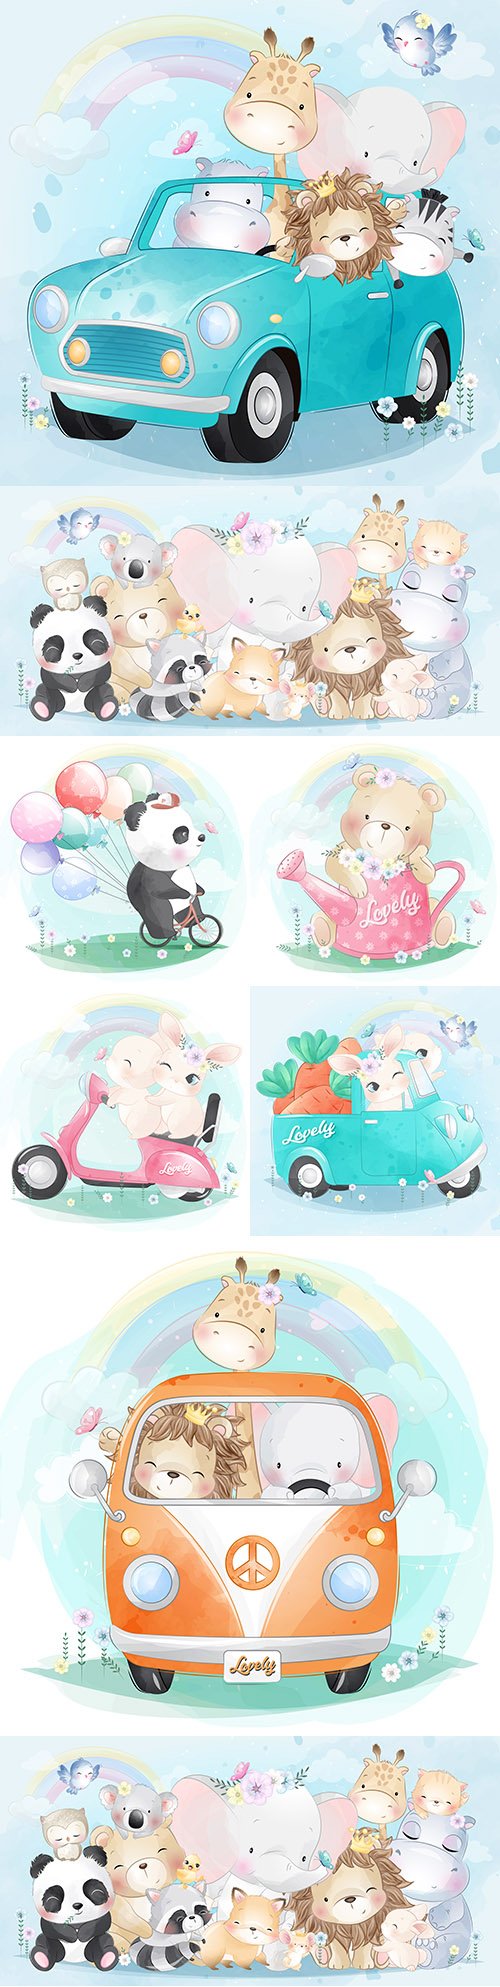 Cute animals with balloons in car illustration watercolor